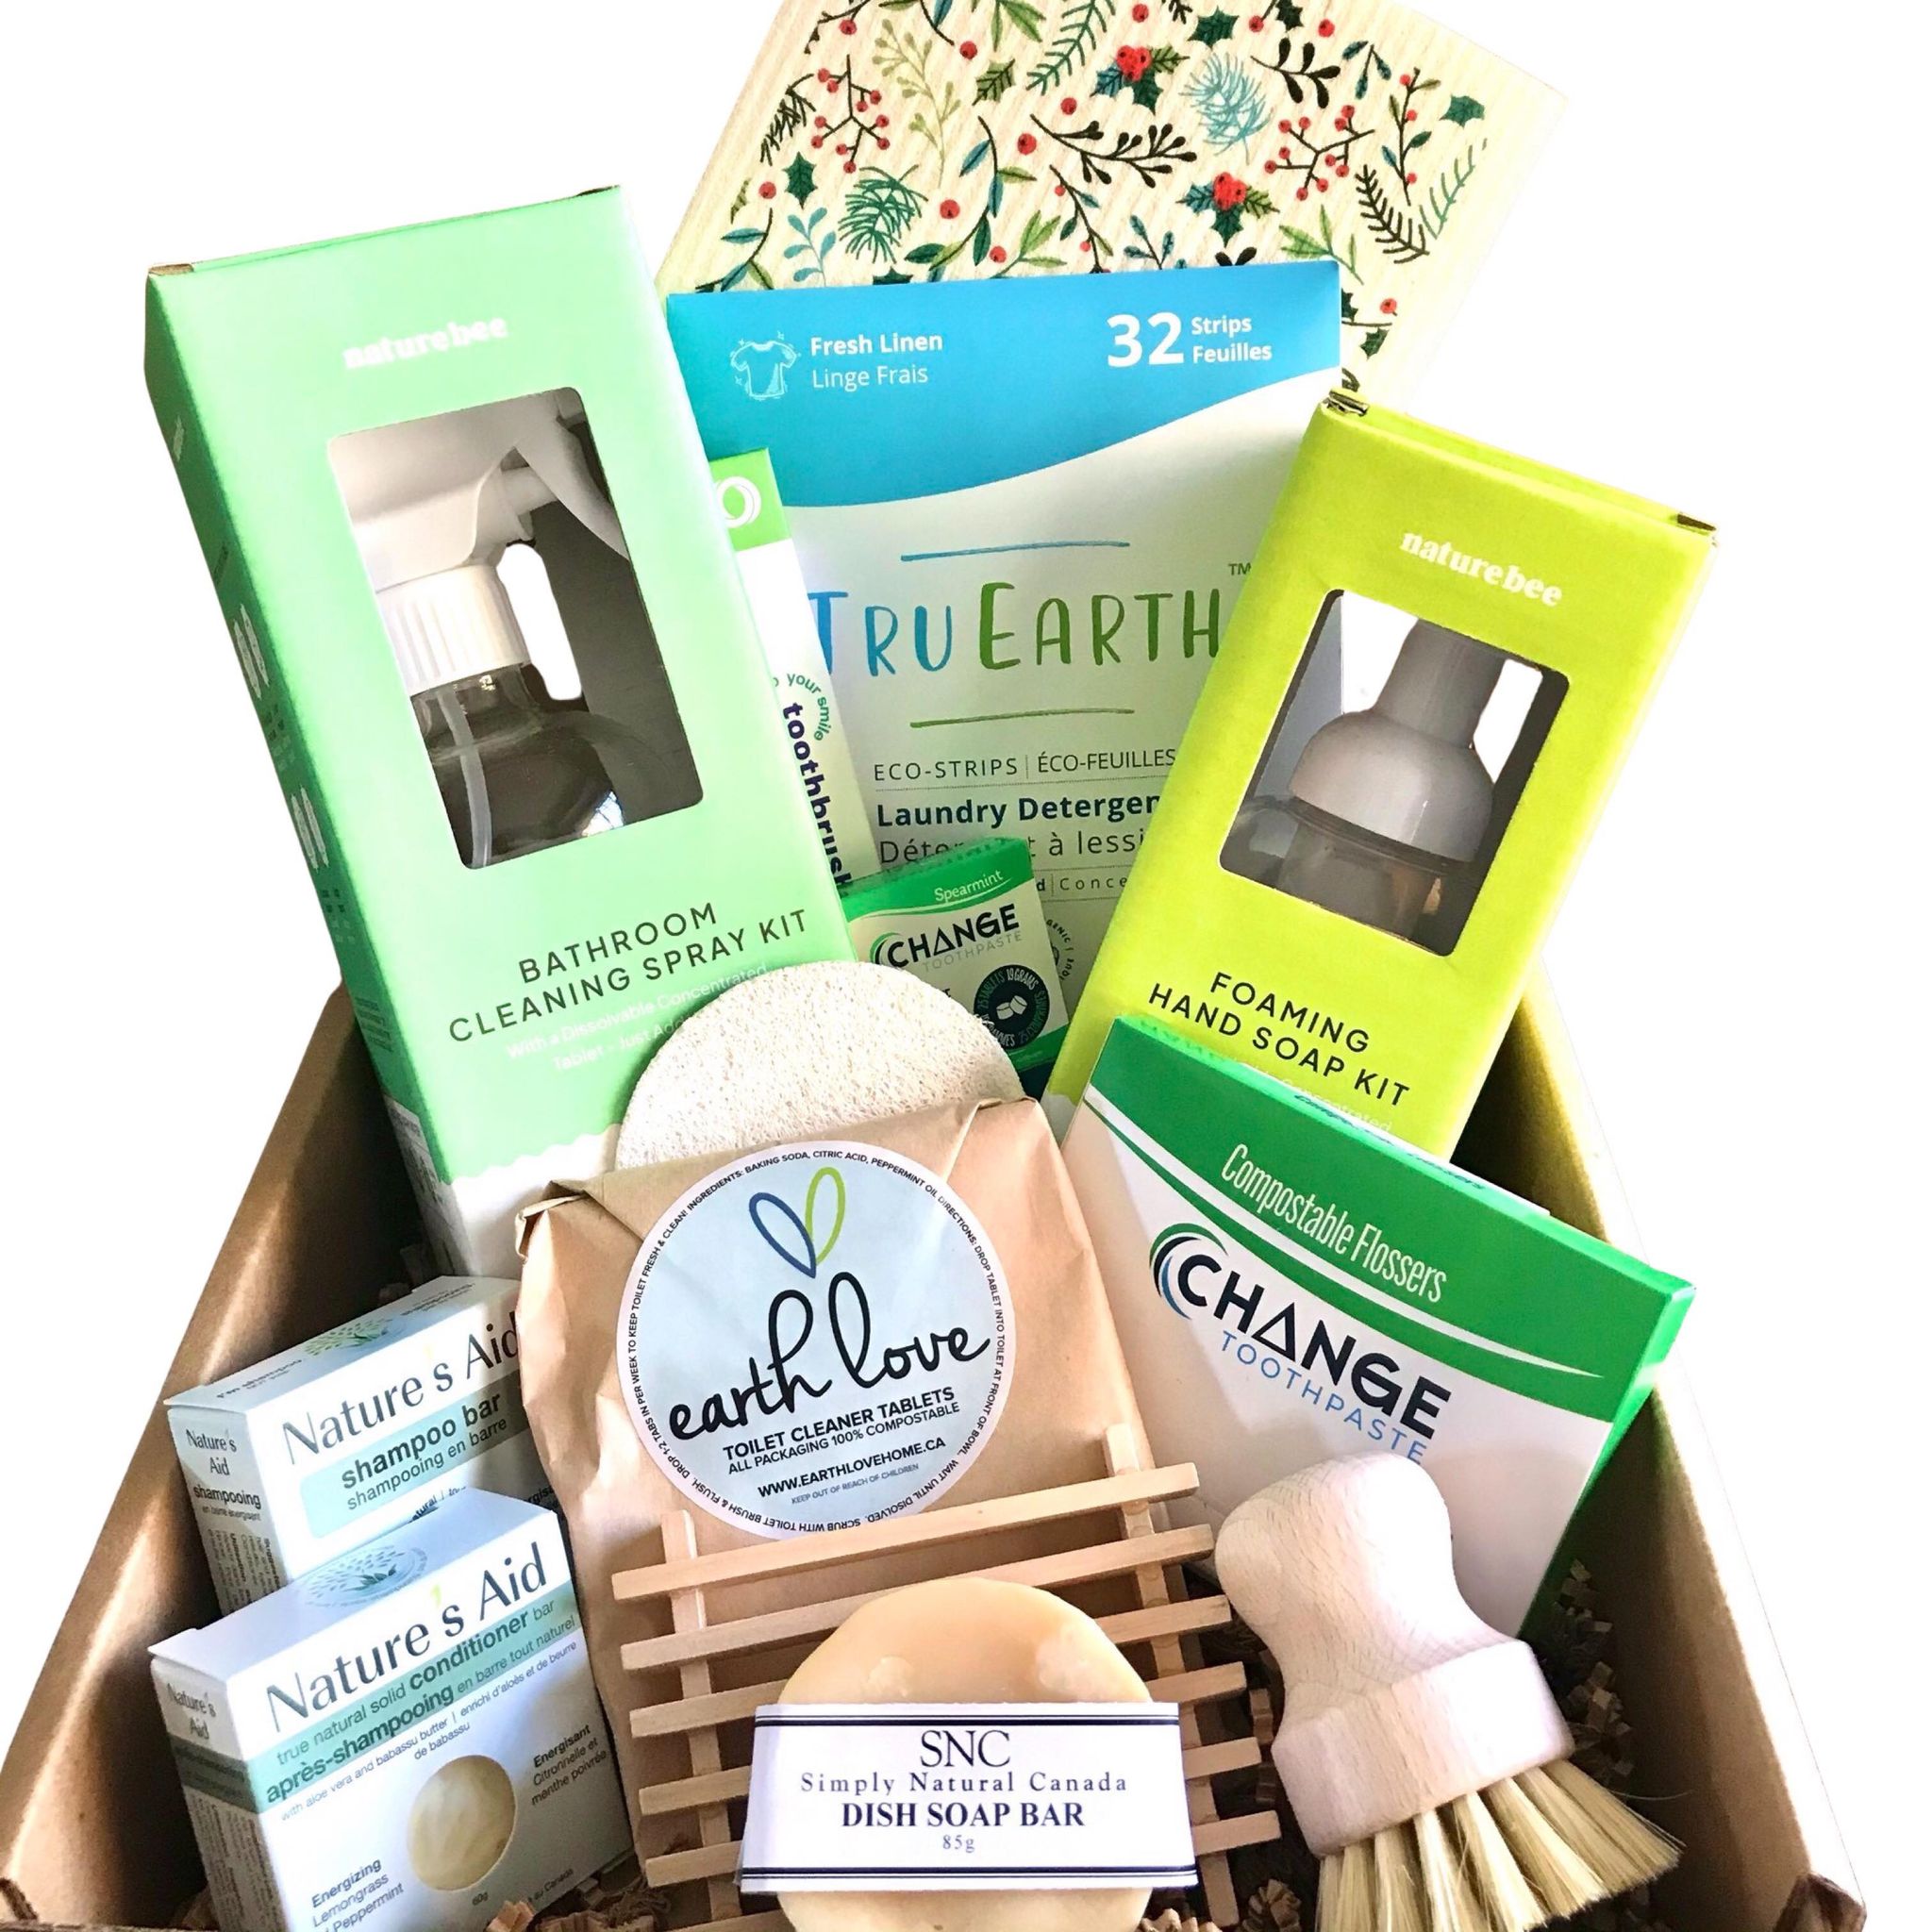 Packed with a variety of essential earth-friendly products from nine sustainable brands, it's the perfect gift for eco-conscious families who value quality, sustainability, and convenience